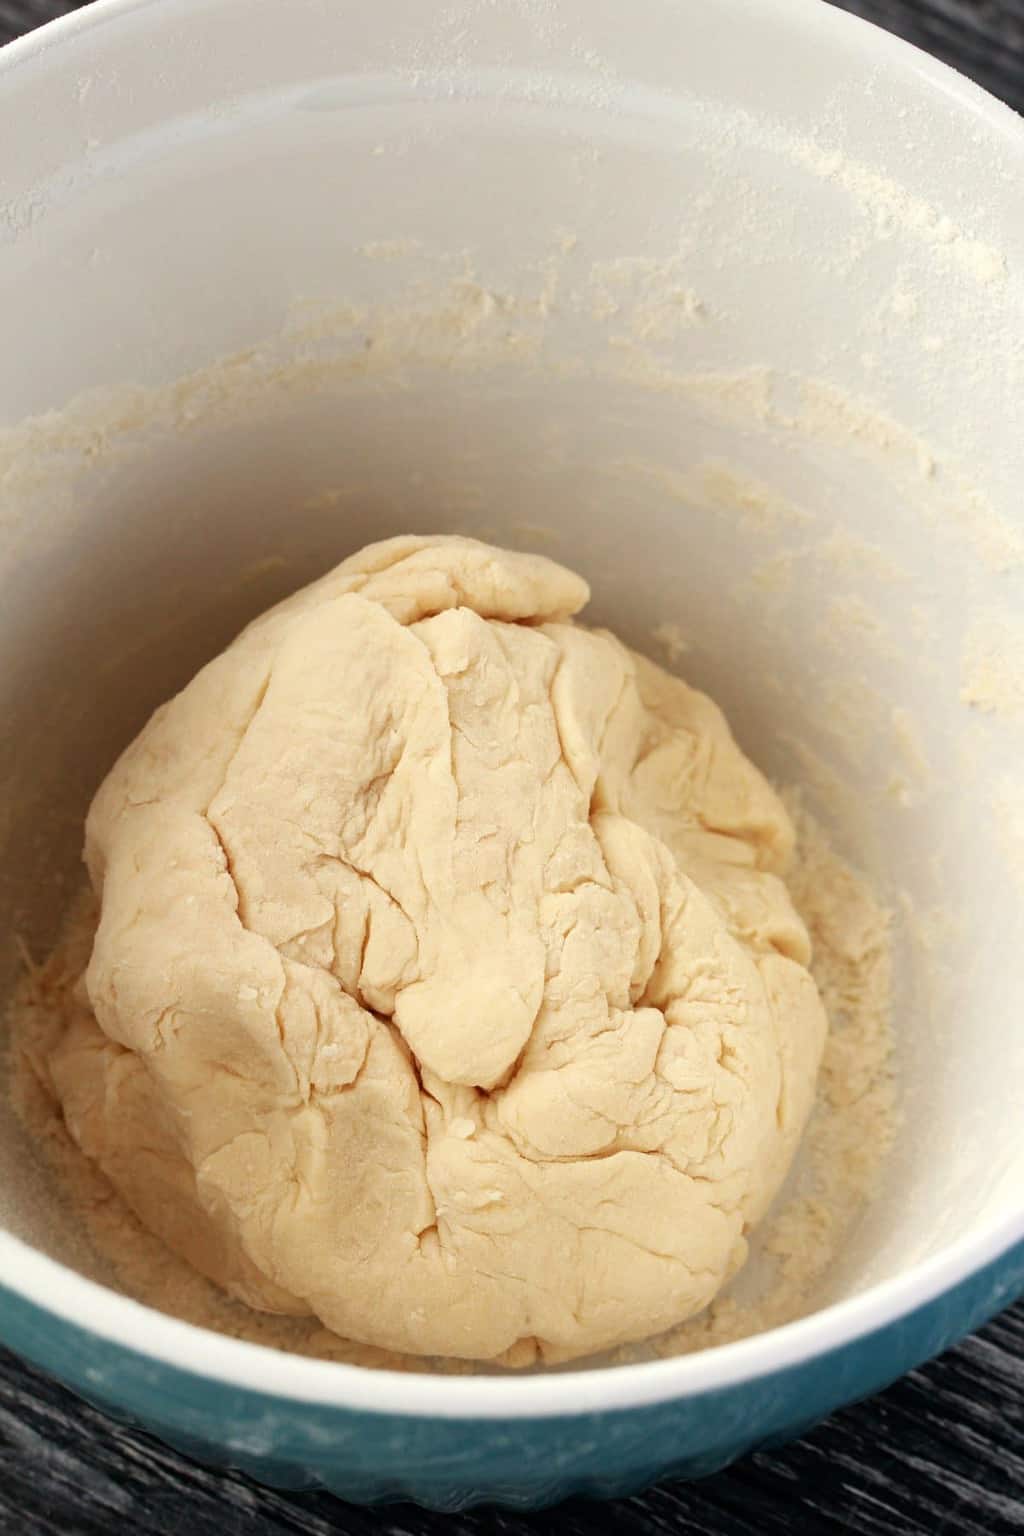 A ball of homemade pizza dough in a mixing bowl